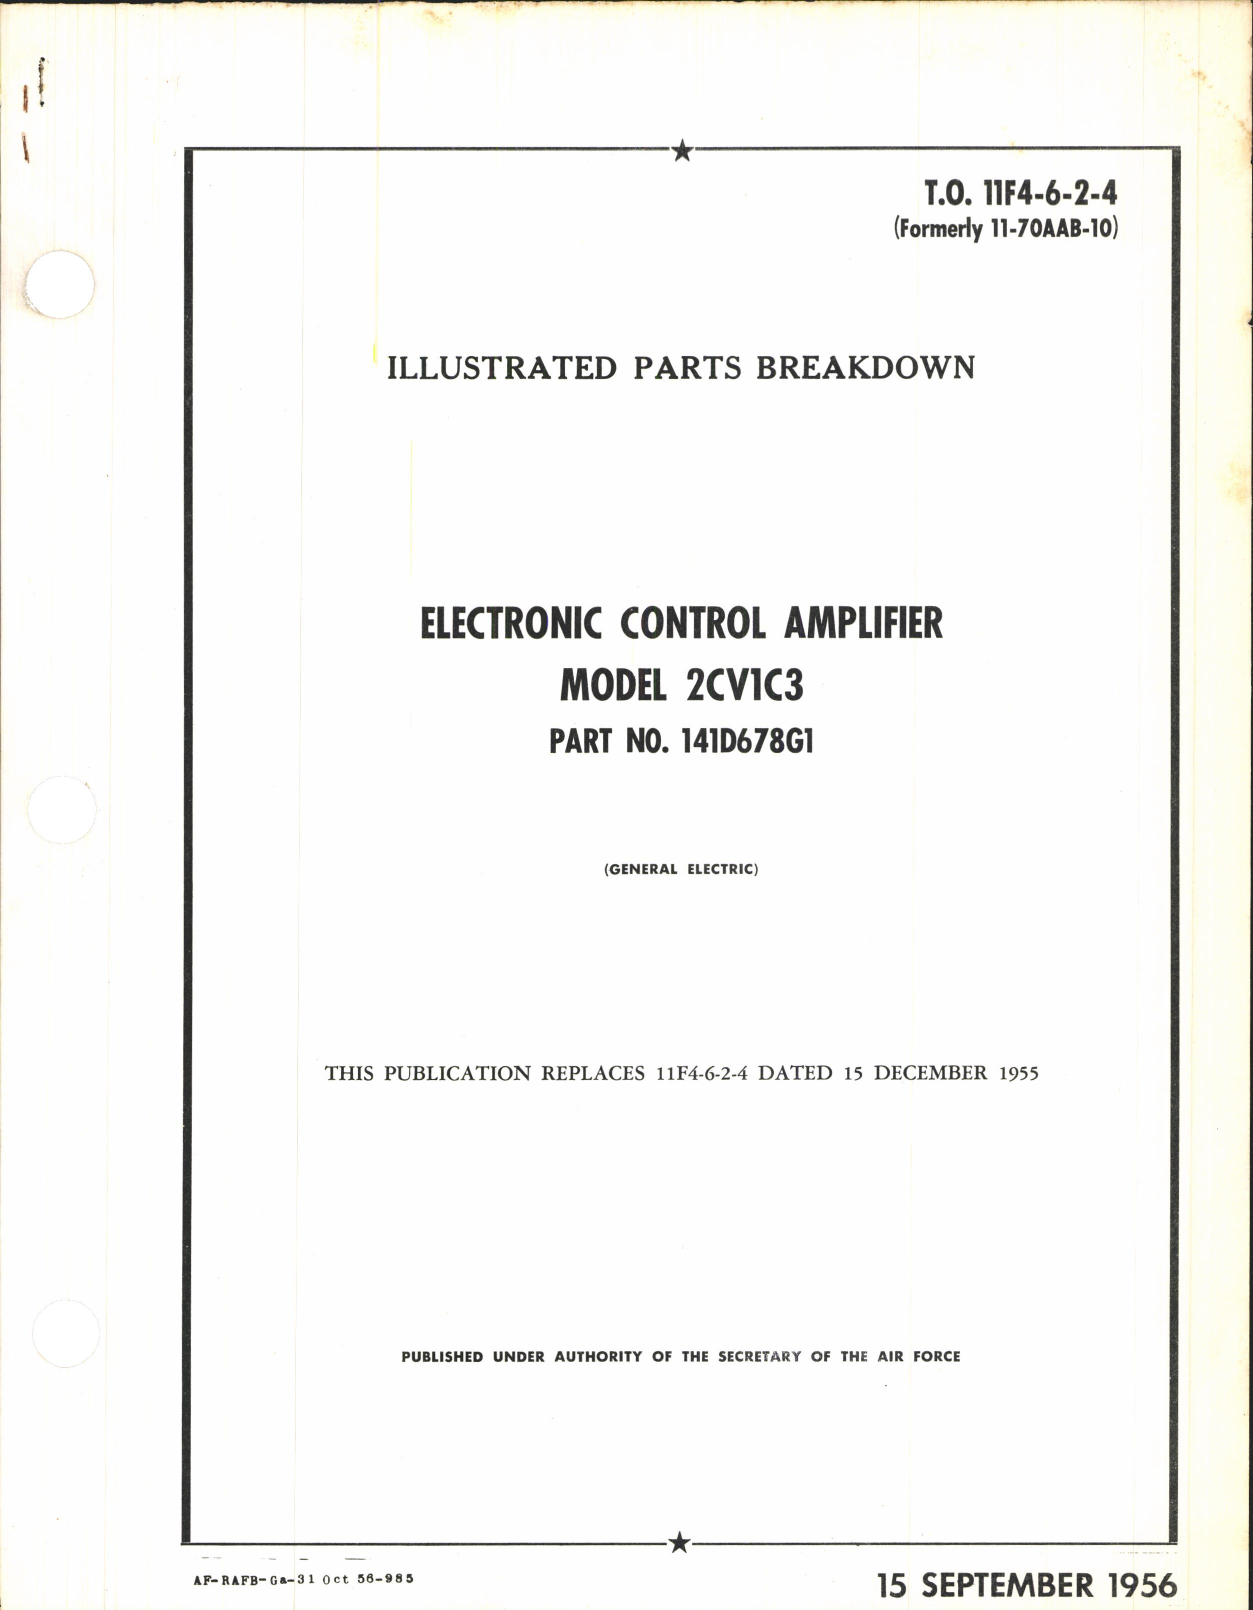 Sample page 1 from AirCorps Library document: Illustrated Parts Breakdown for Electronic Control Amplifier Model 2CV1C3 Part No. 141D678G1